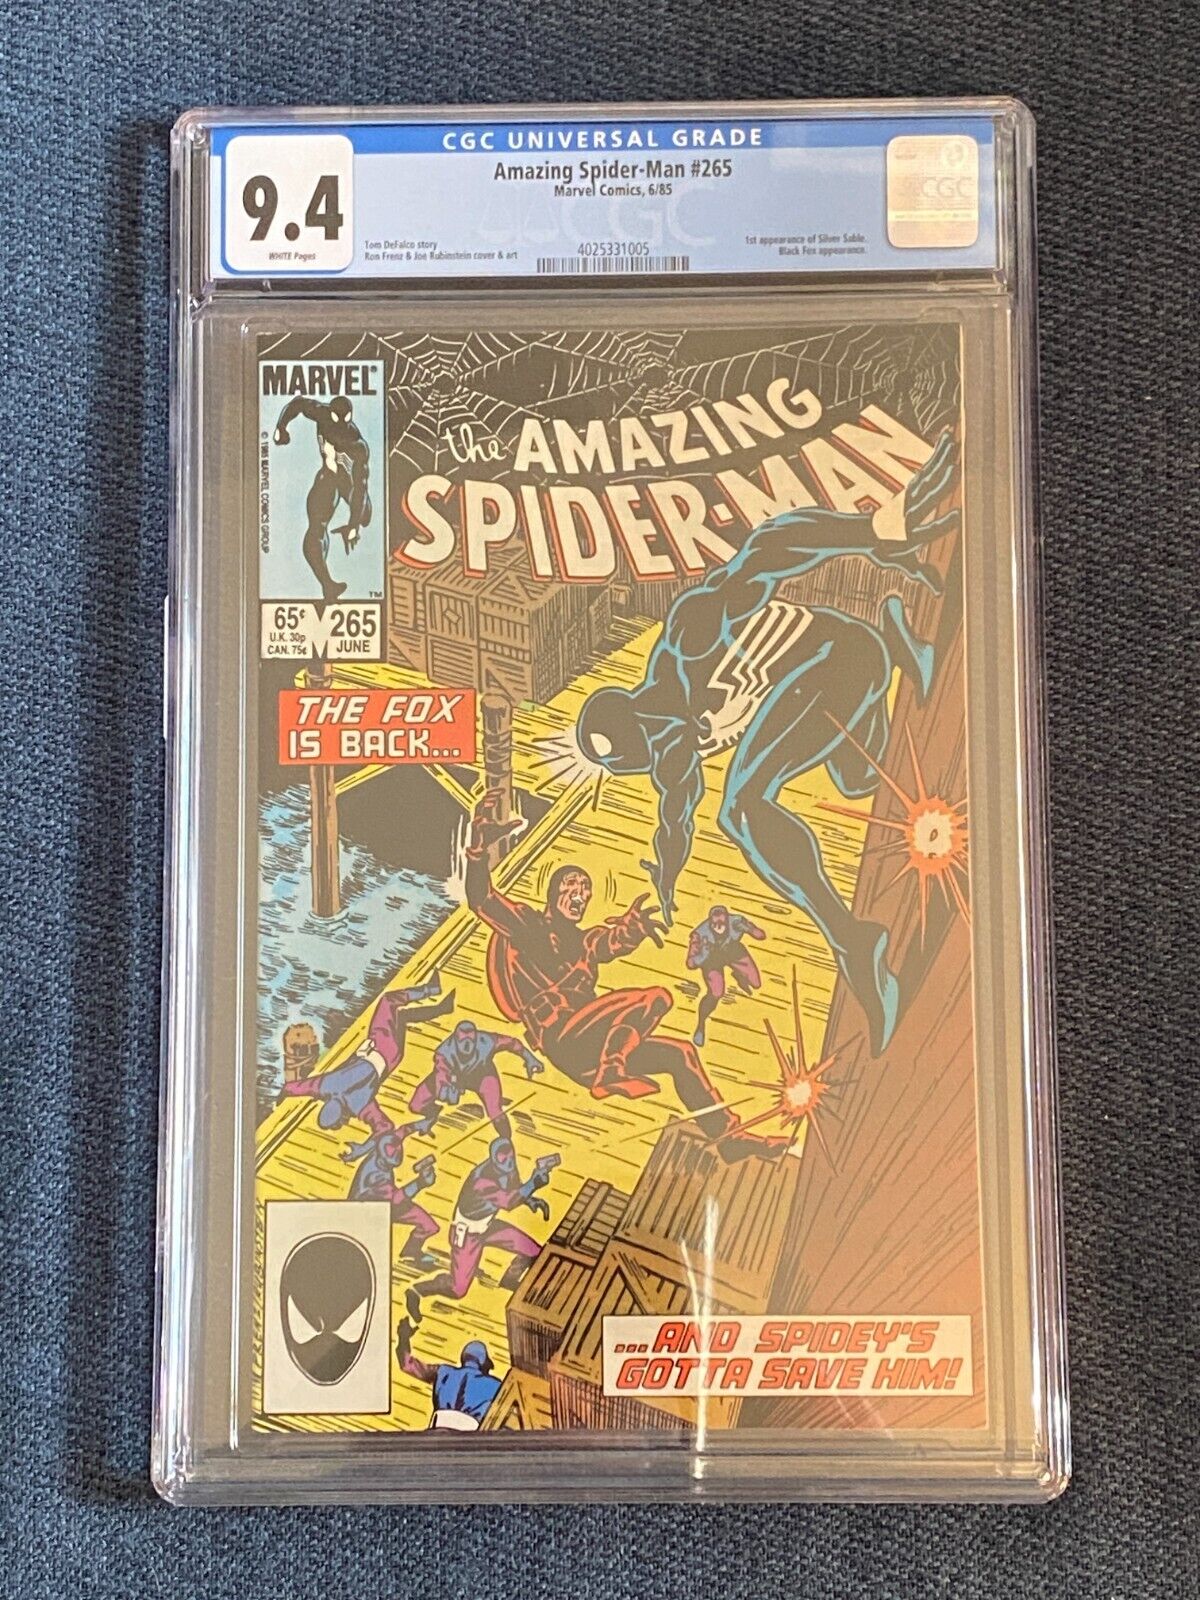 Amazing Spider-Man #265 CGC 9.4 1st appearance of Silver Sable